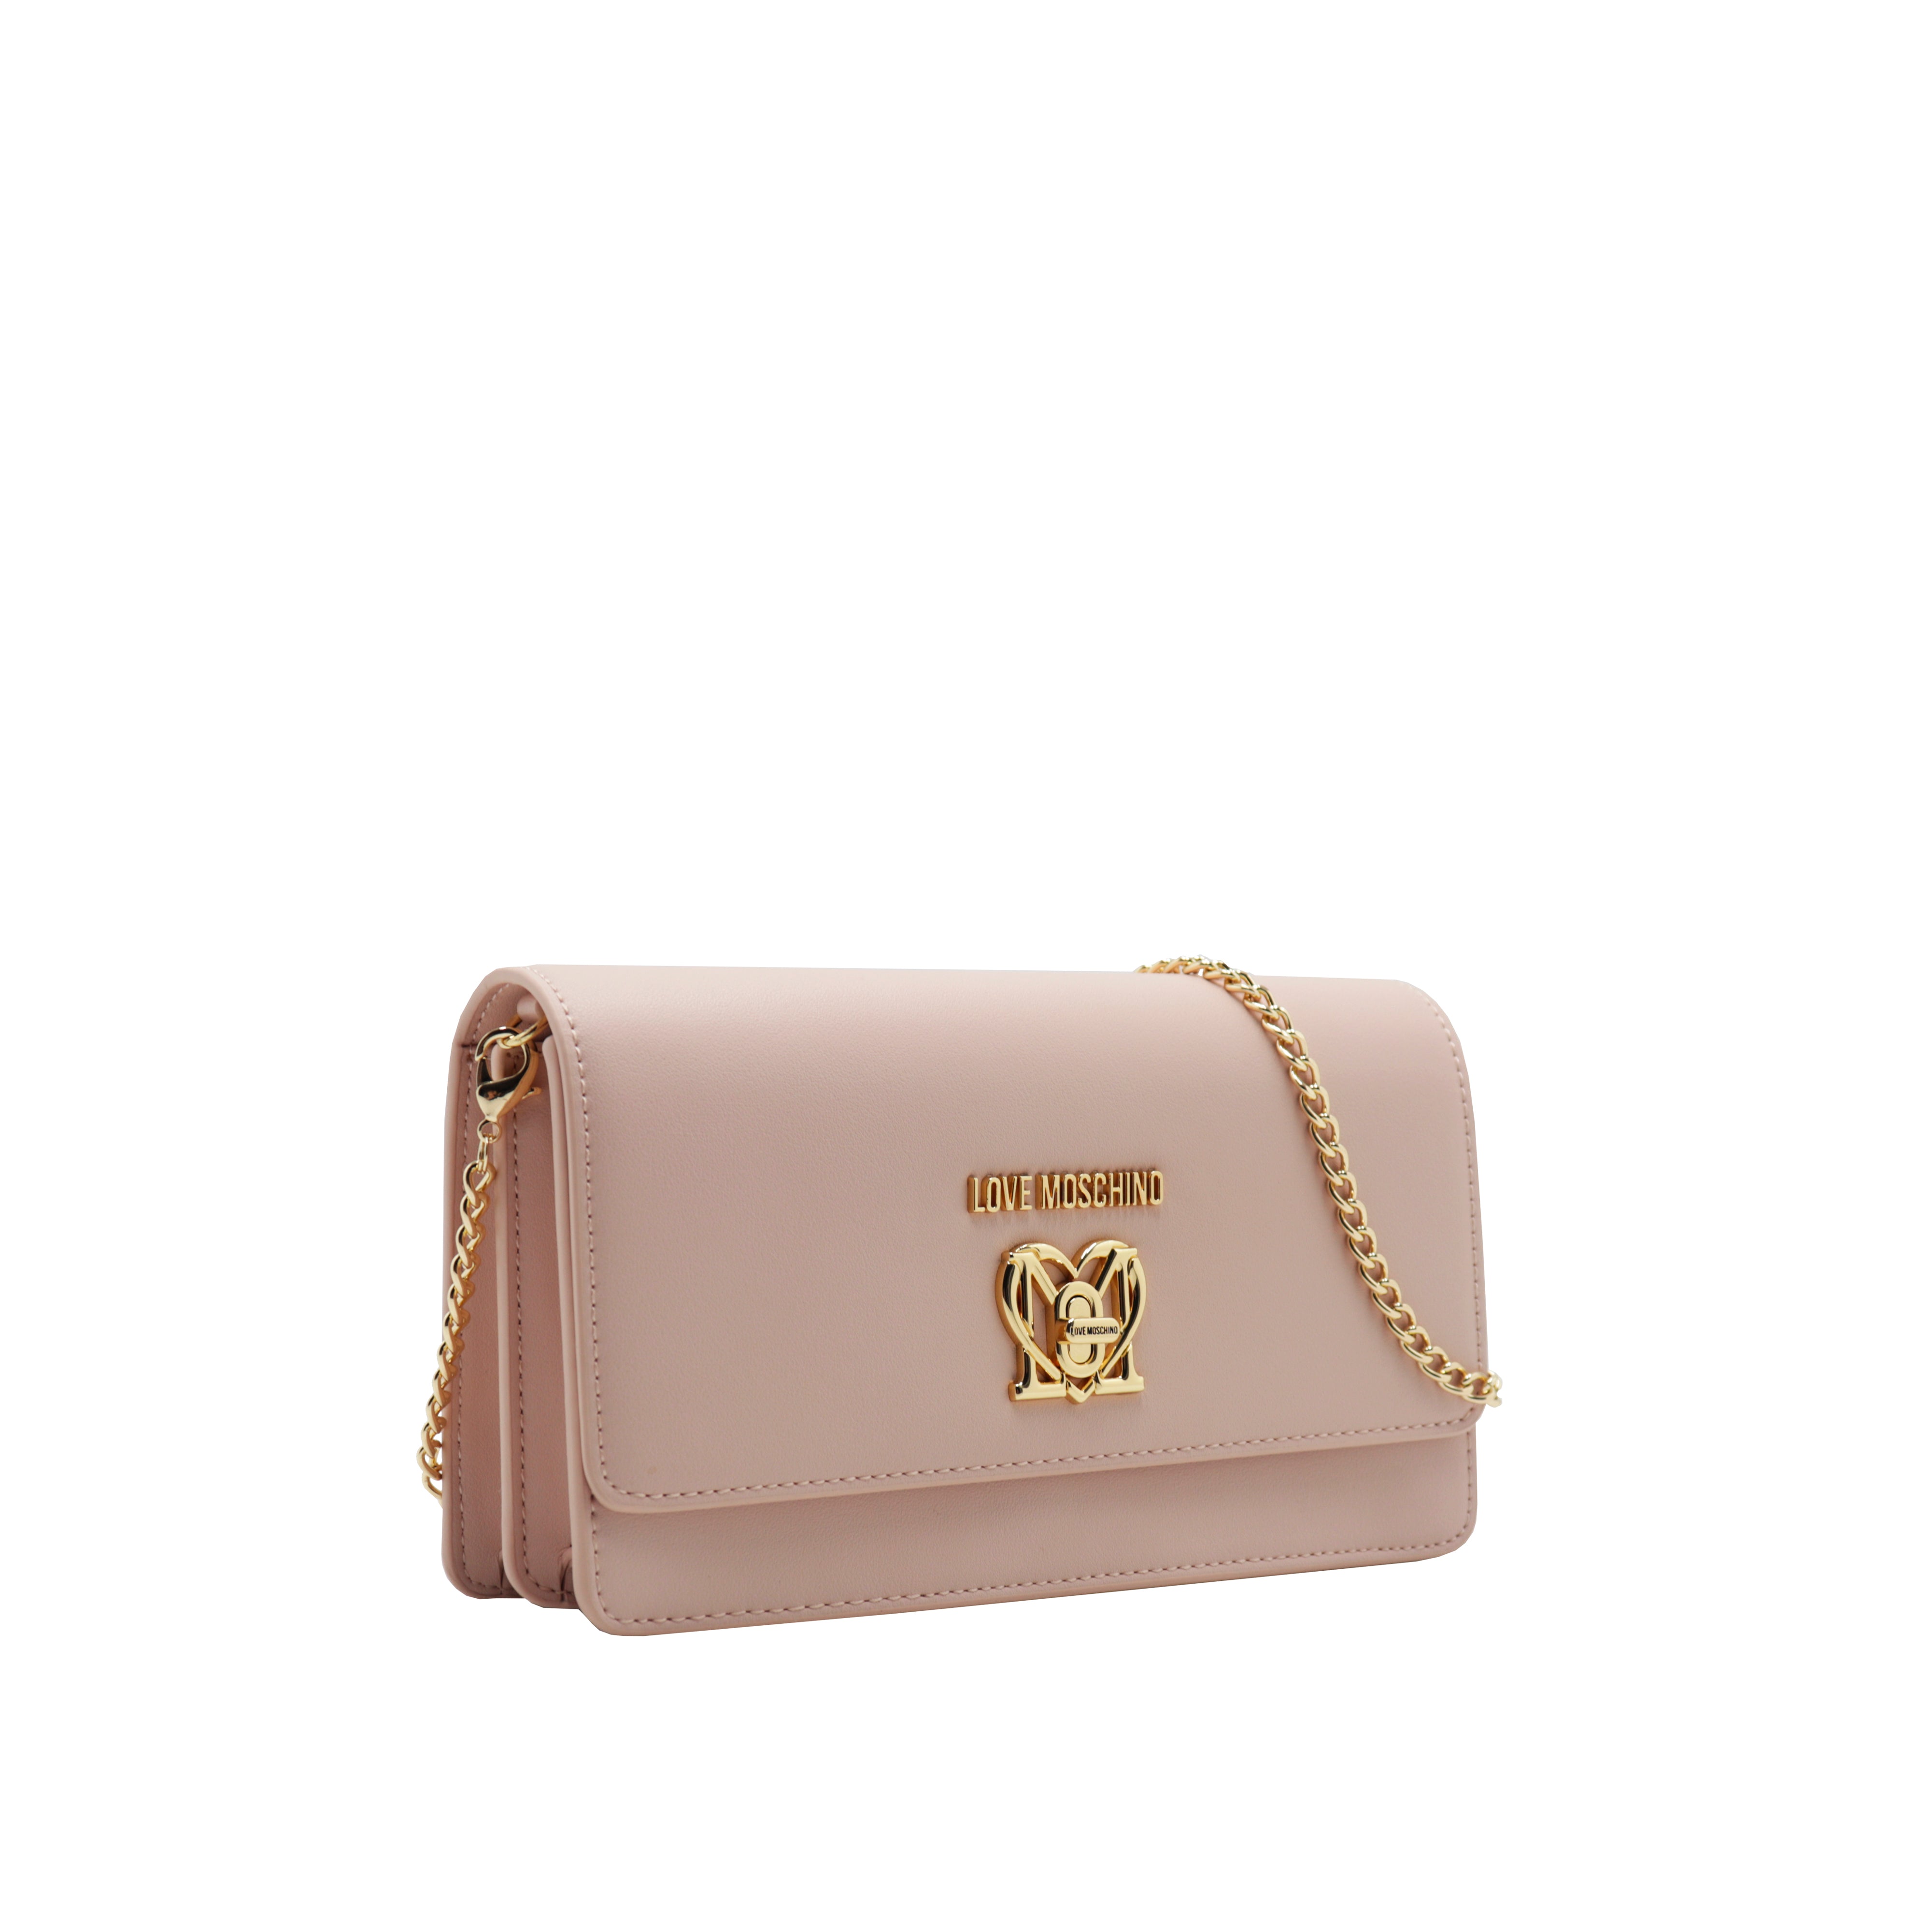 Love Moschino Handbag with shoulder strap and Logo Pink Nude